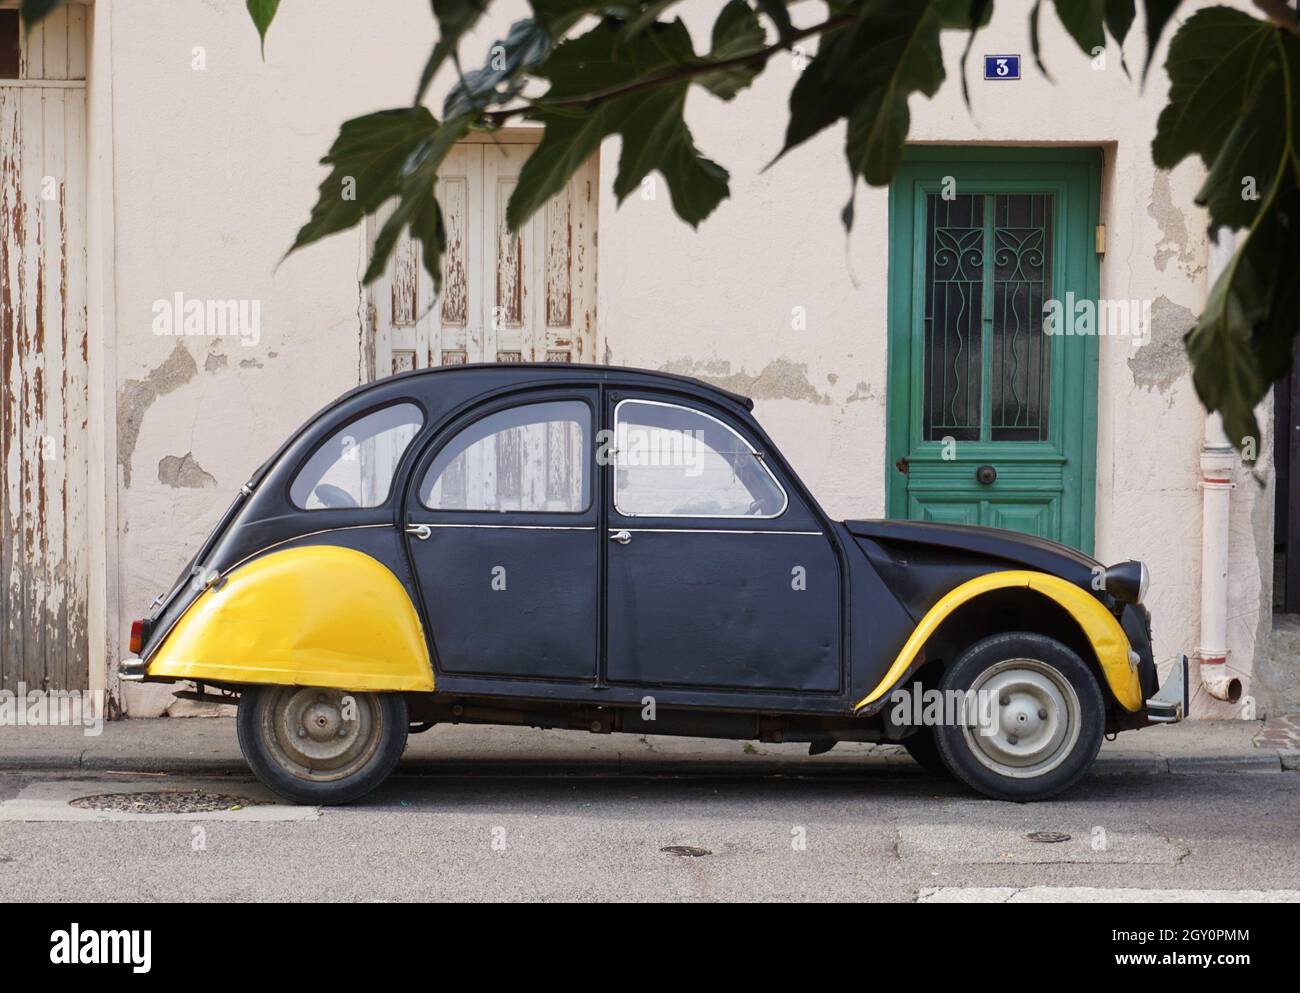 Vintage Citroen 2CV car, black and yellow in colour parked on street outside house on street in village in France Stock Photo